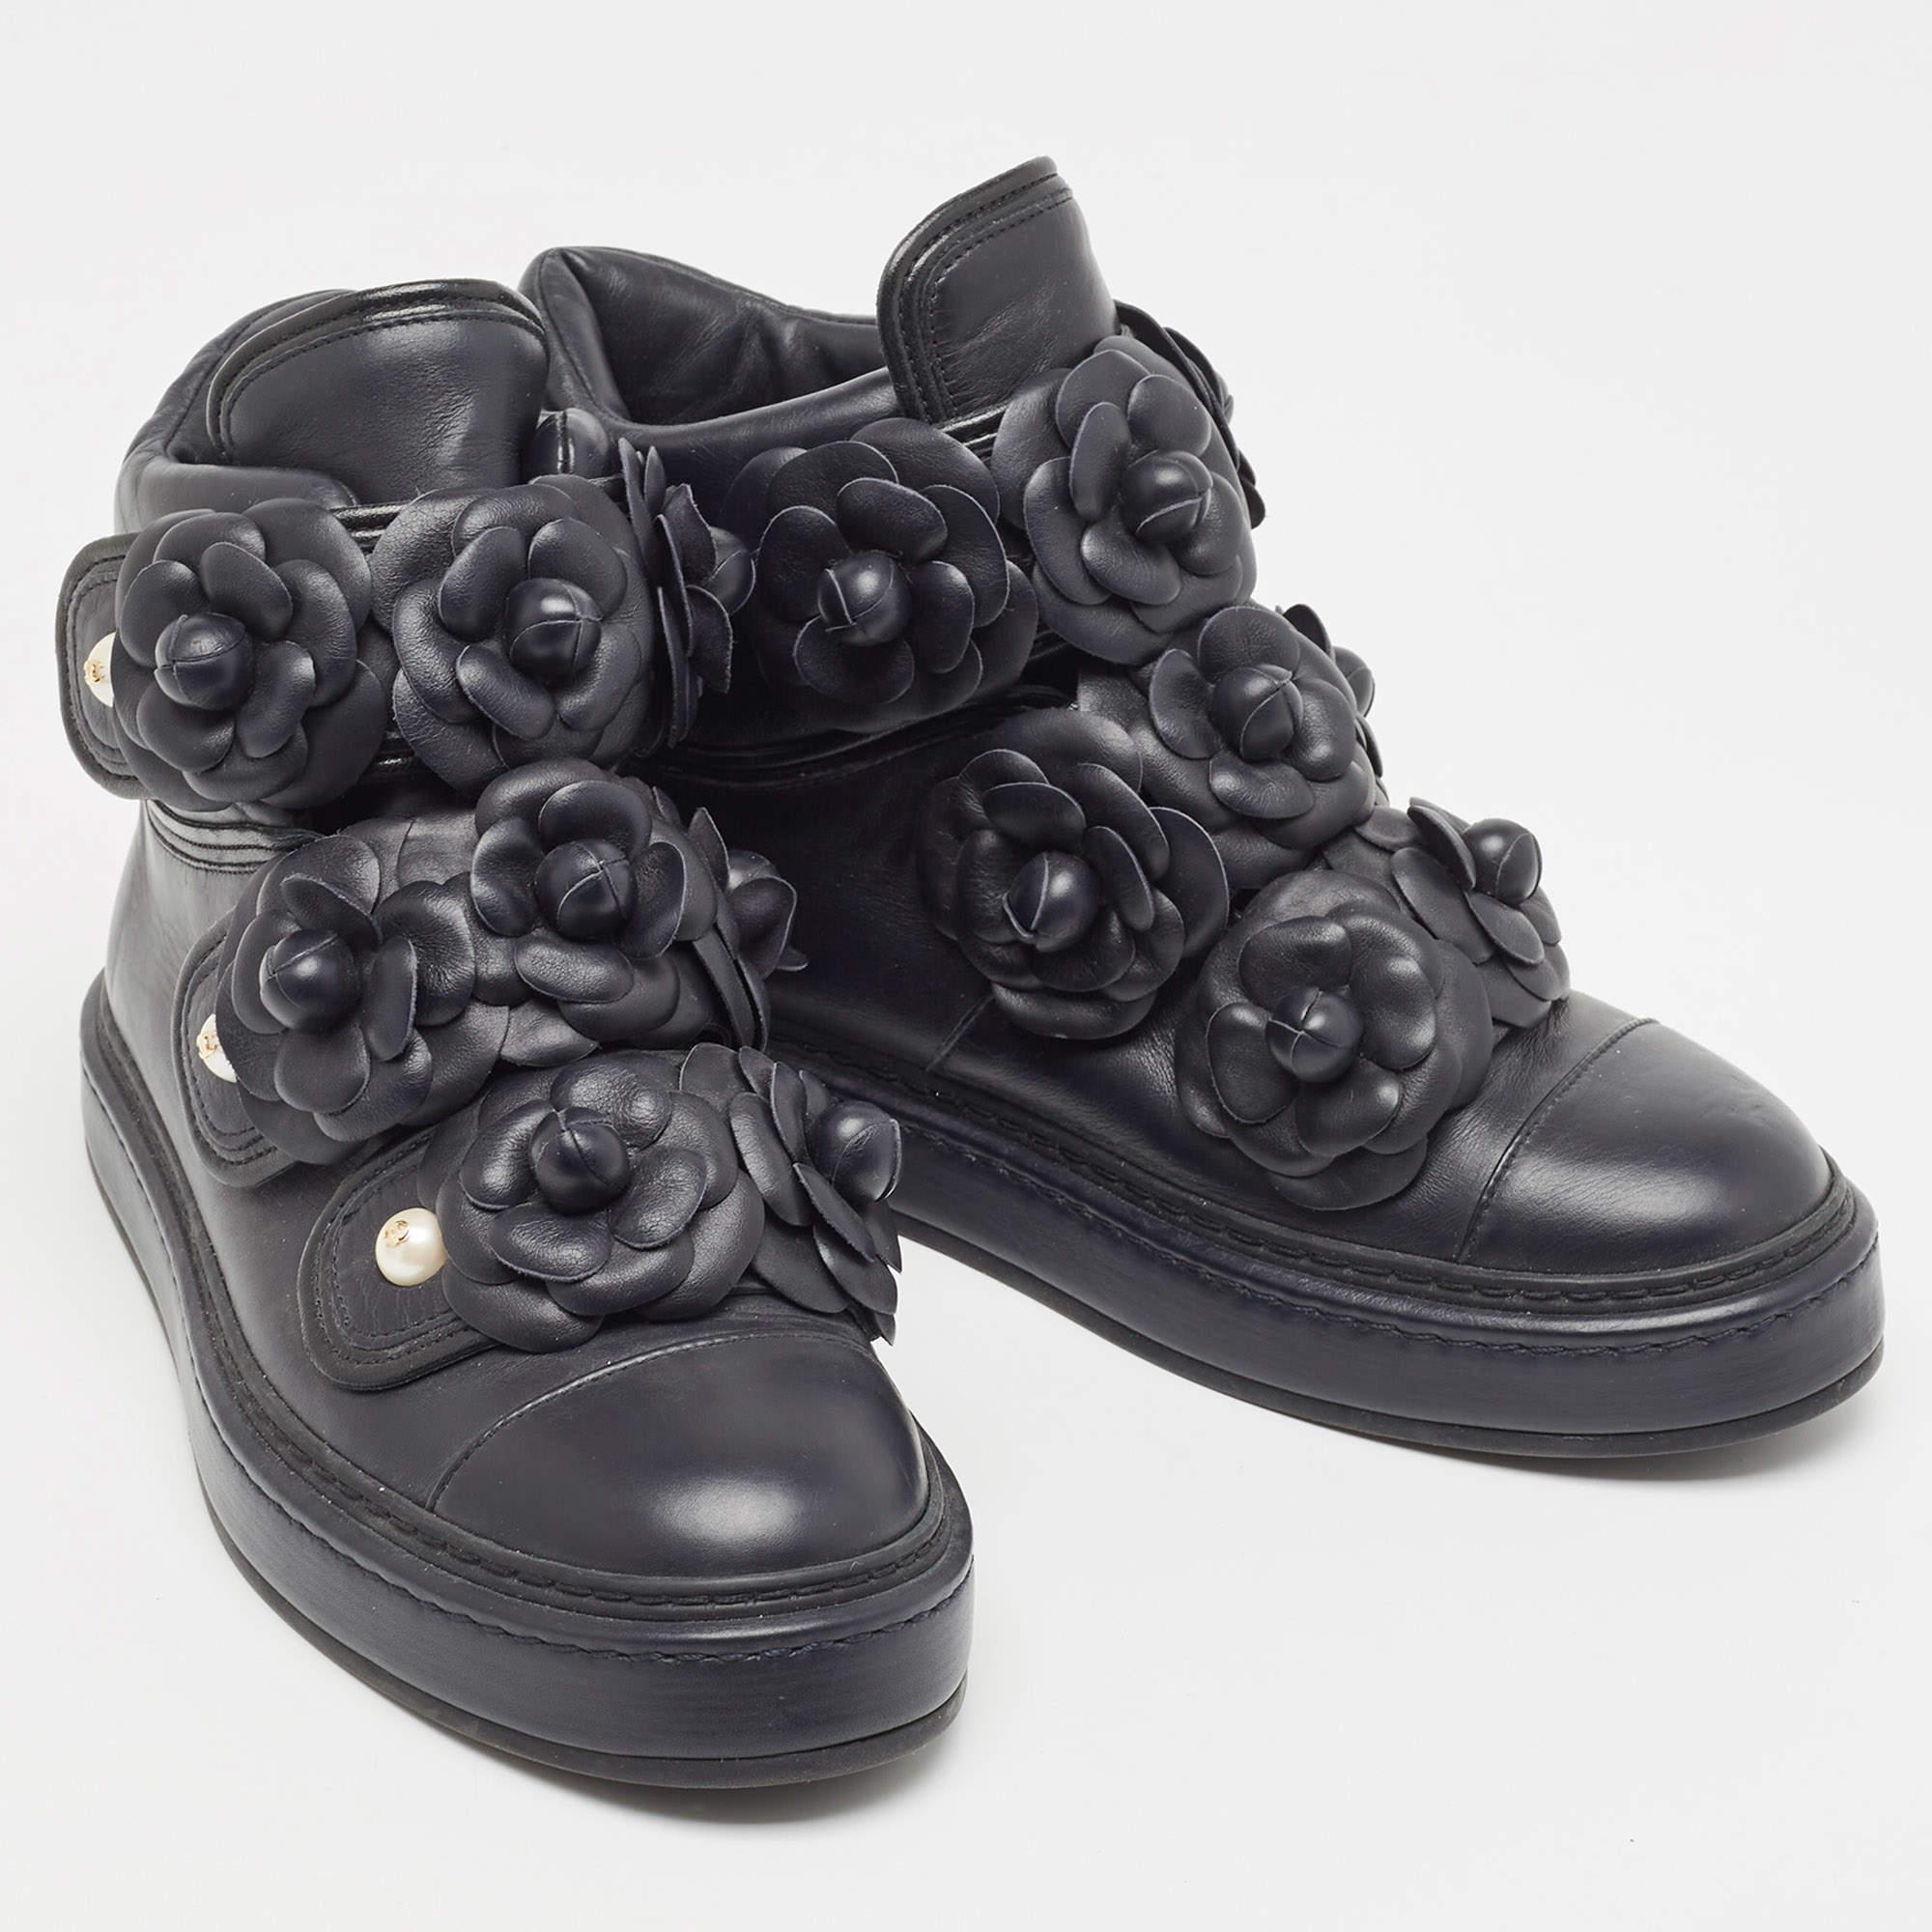 Women's Chanel Black Leather Camellia Flowers Embellished High Top Sneakers Size 36.5 For Sale